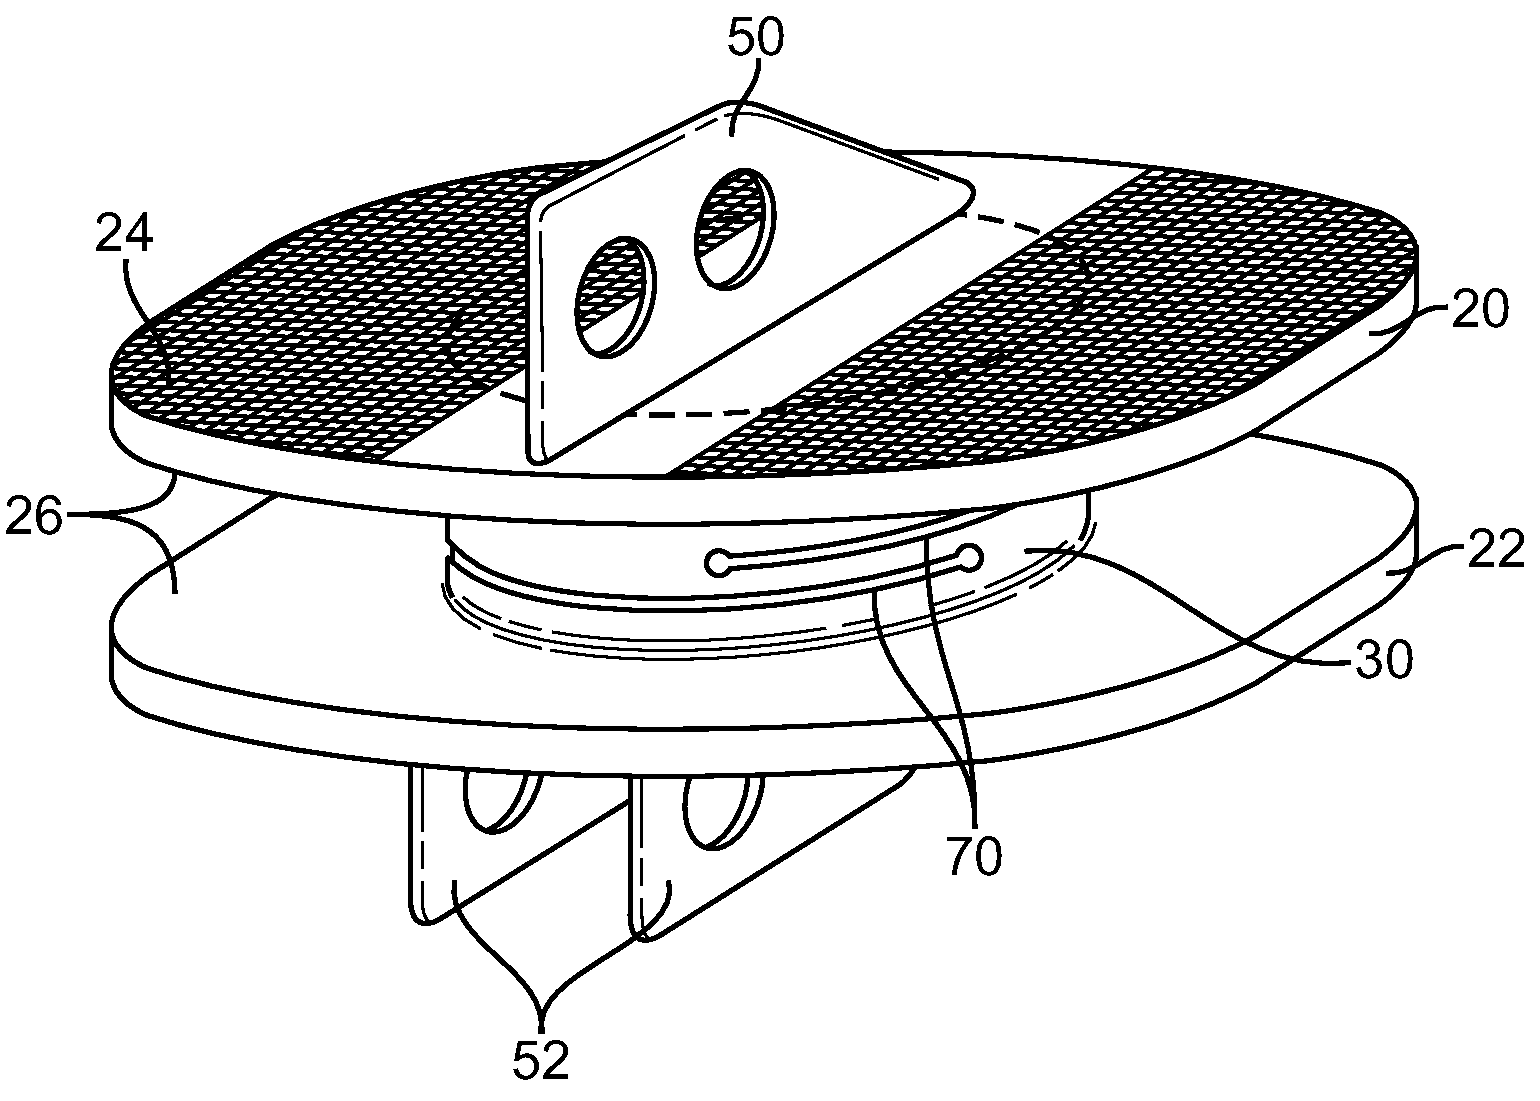 Dynamic Spacer Device and Method for Spanning a Space Formed upon Removal of an Intervertebral Disc